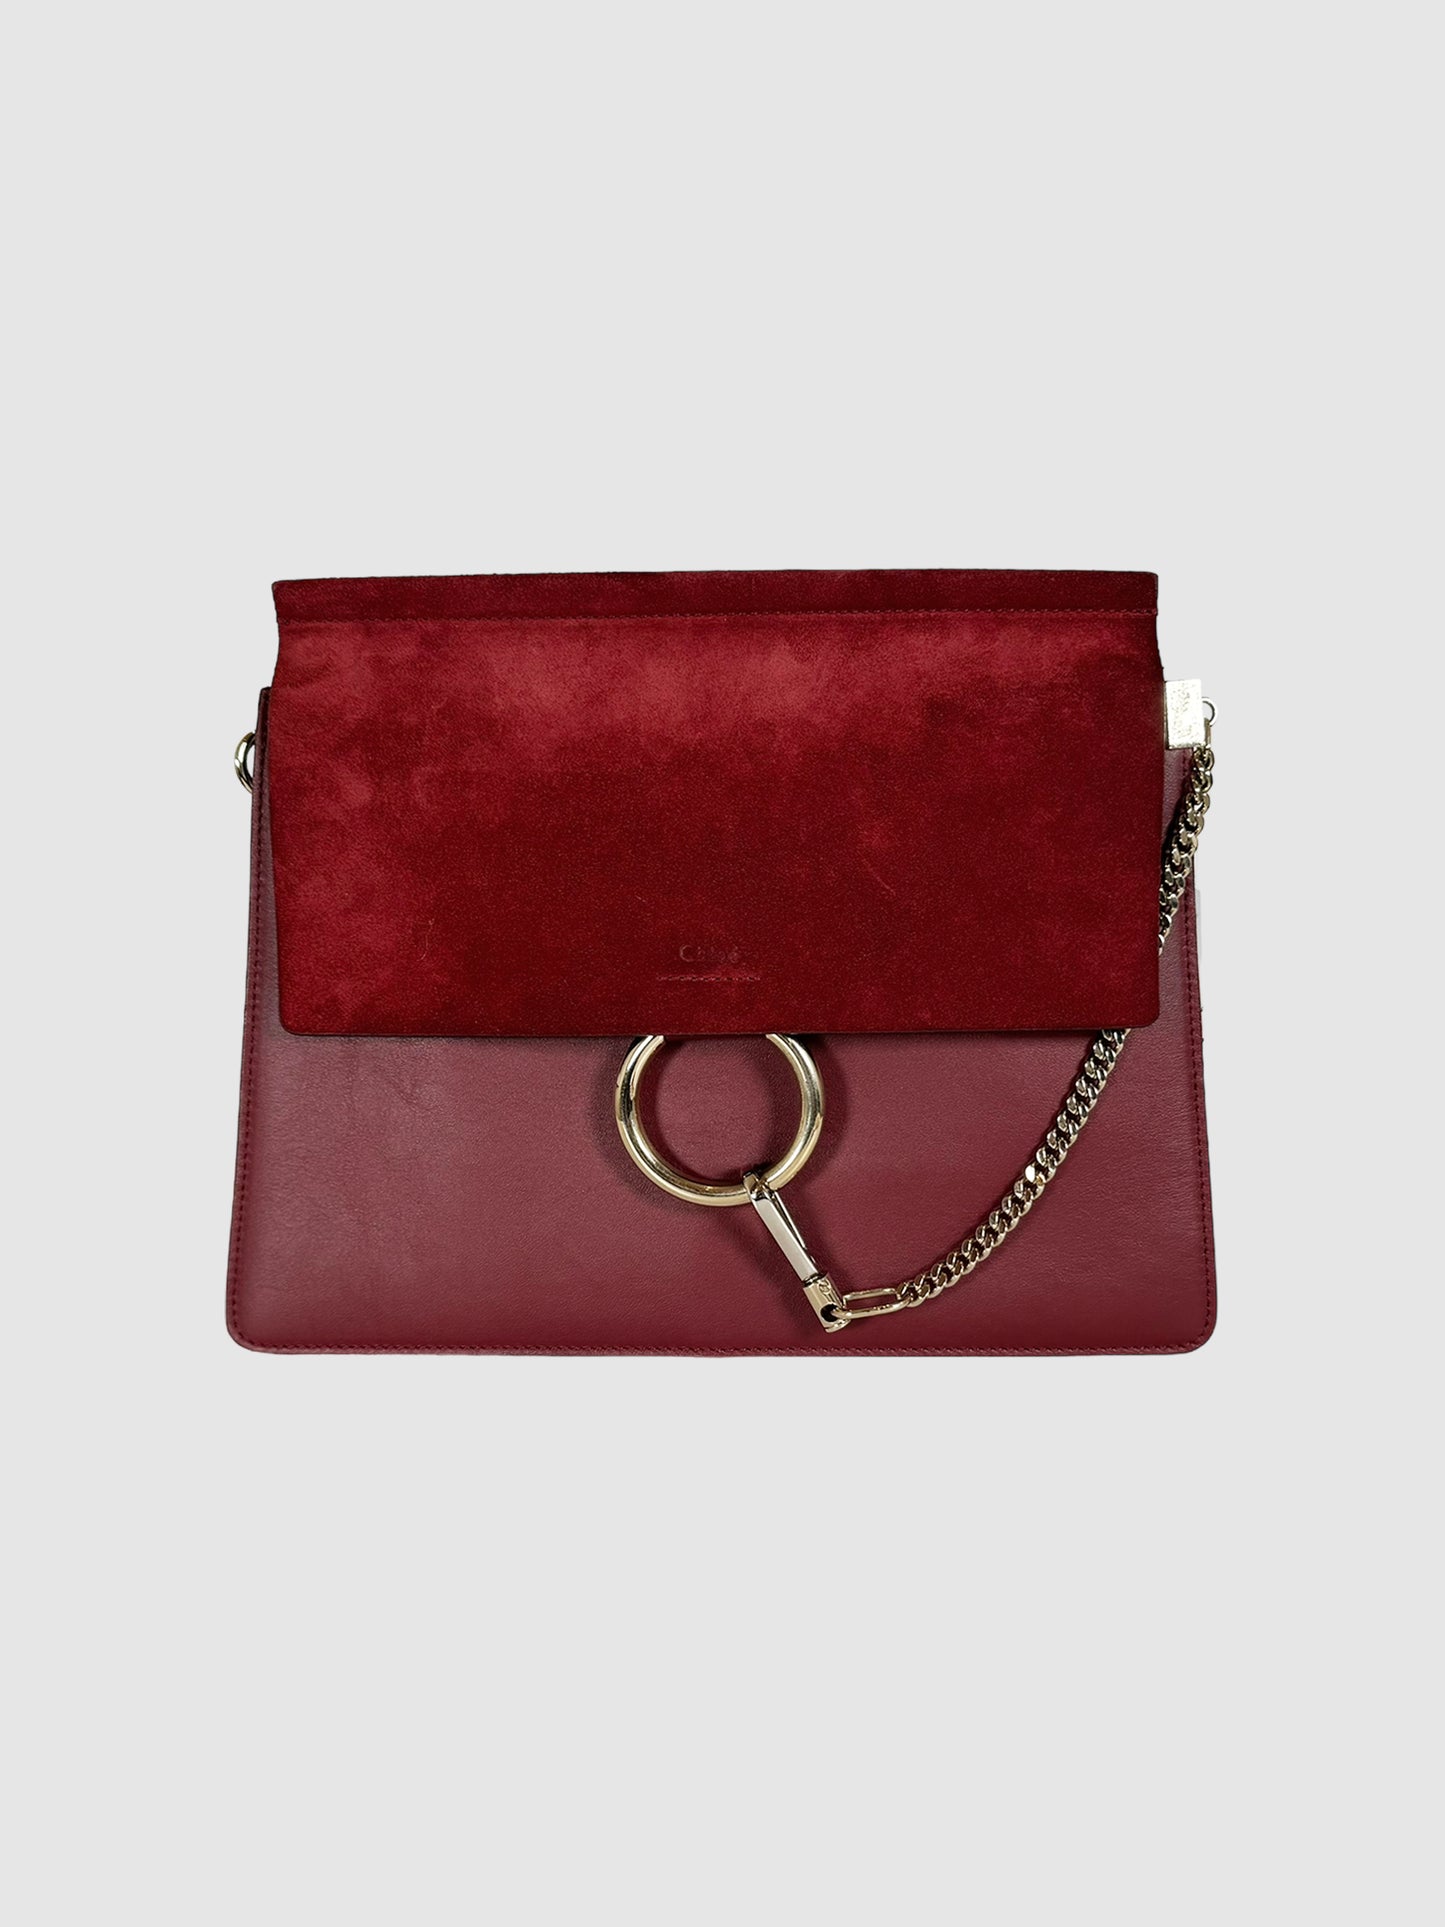 Chloé Calfskin Leather and Suede Faye Bag in Dark Red